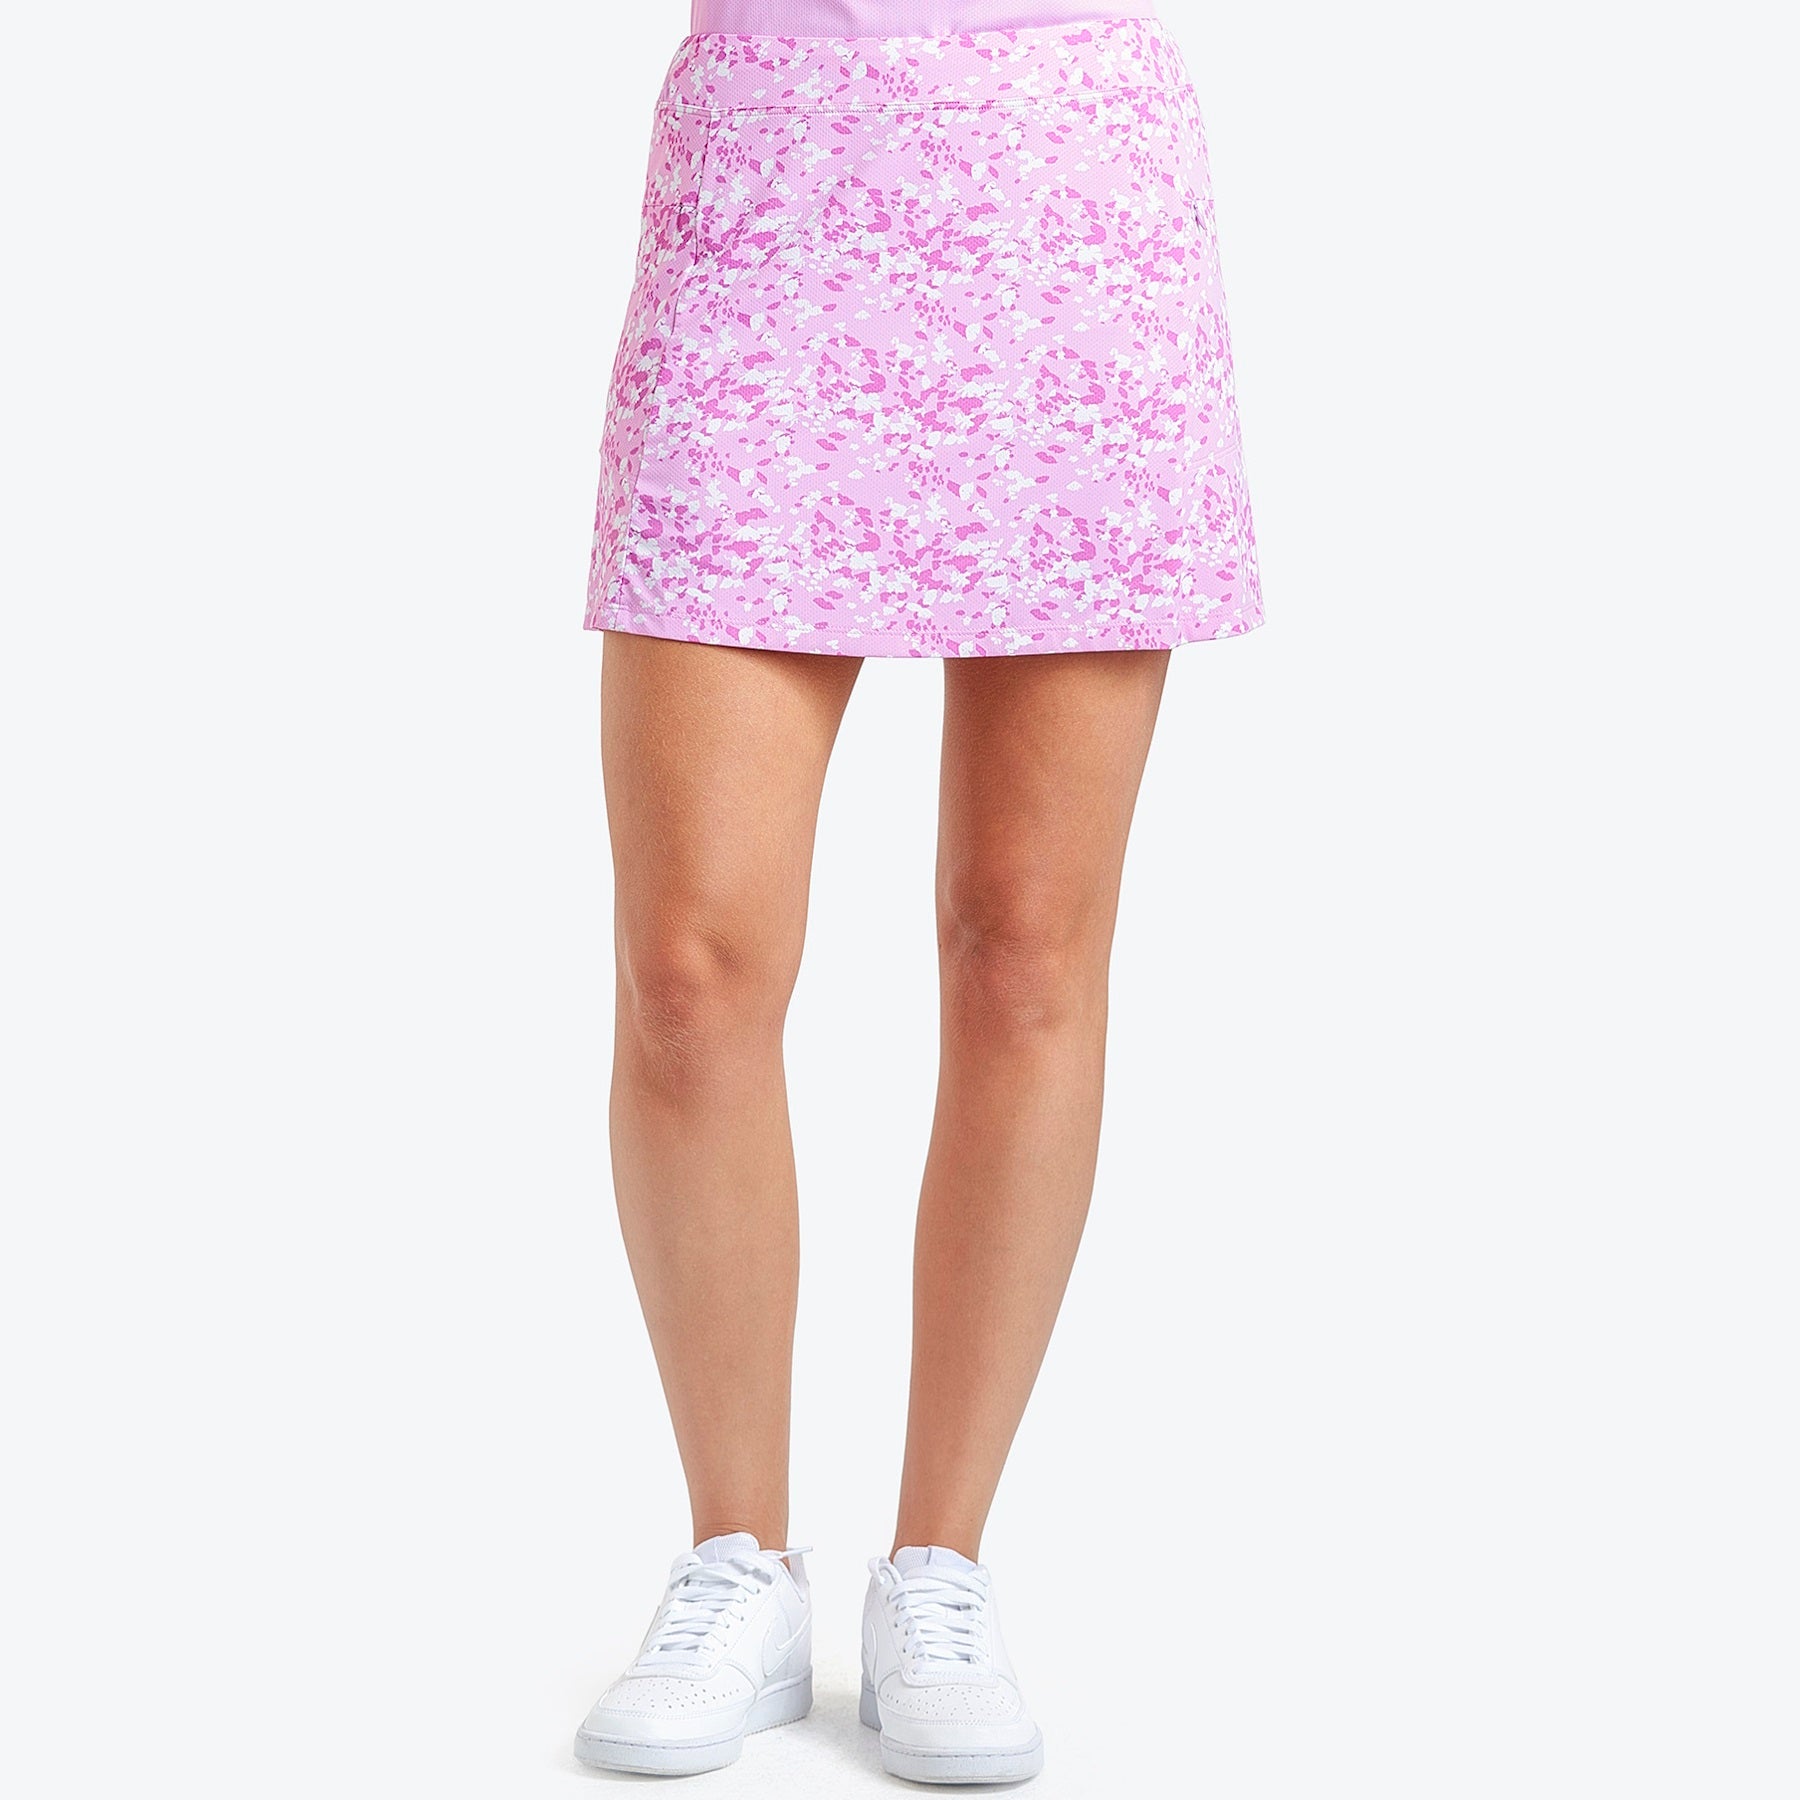 Nivo Layla Liv Cool Pull-On Skort in Bubble Gum Print Front Facing Product Image